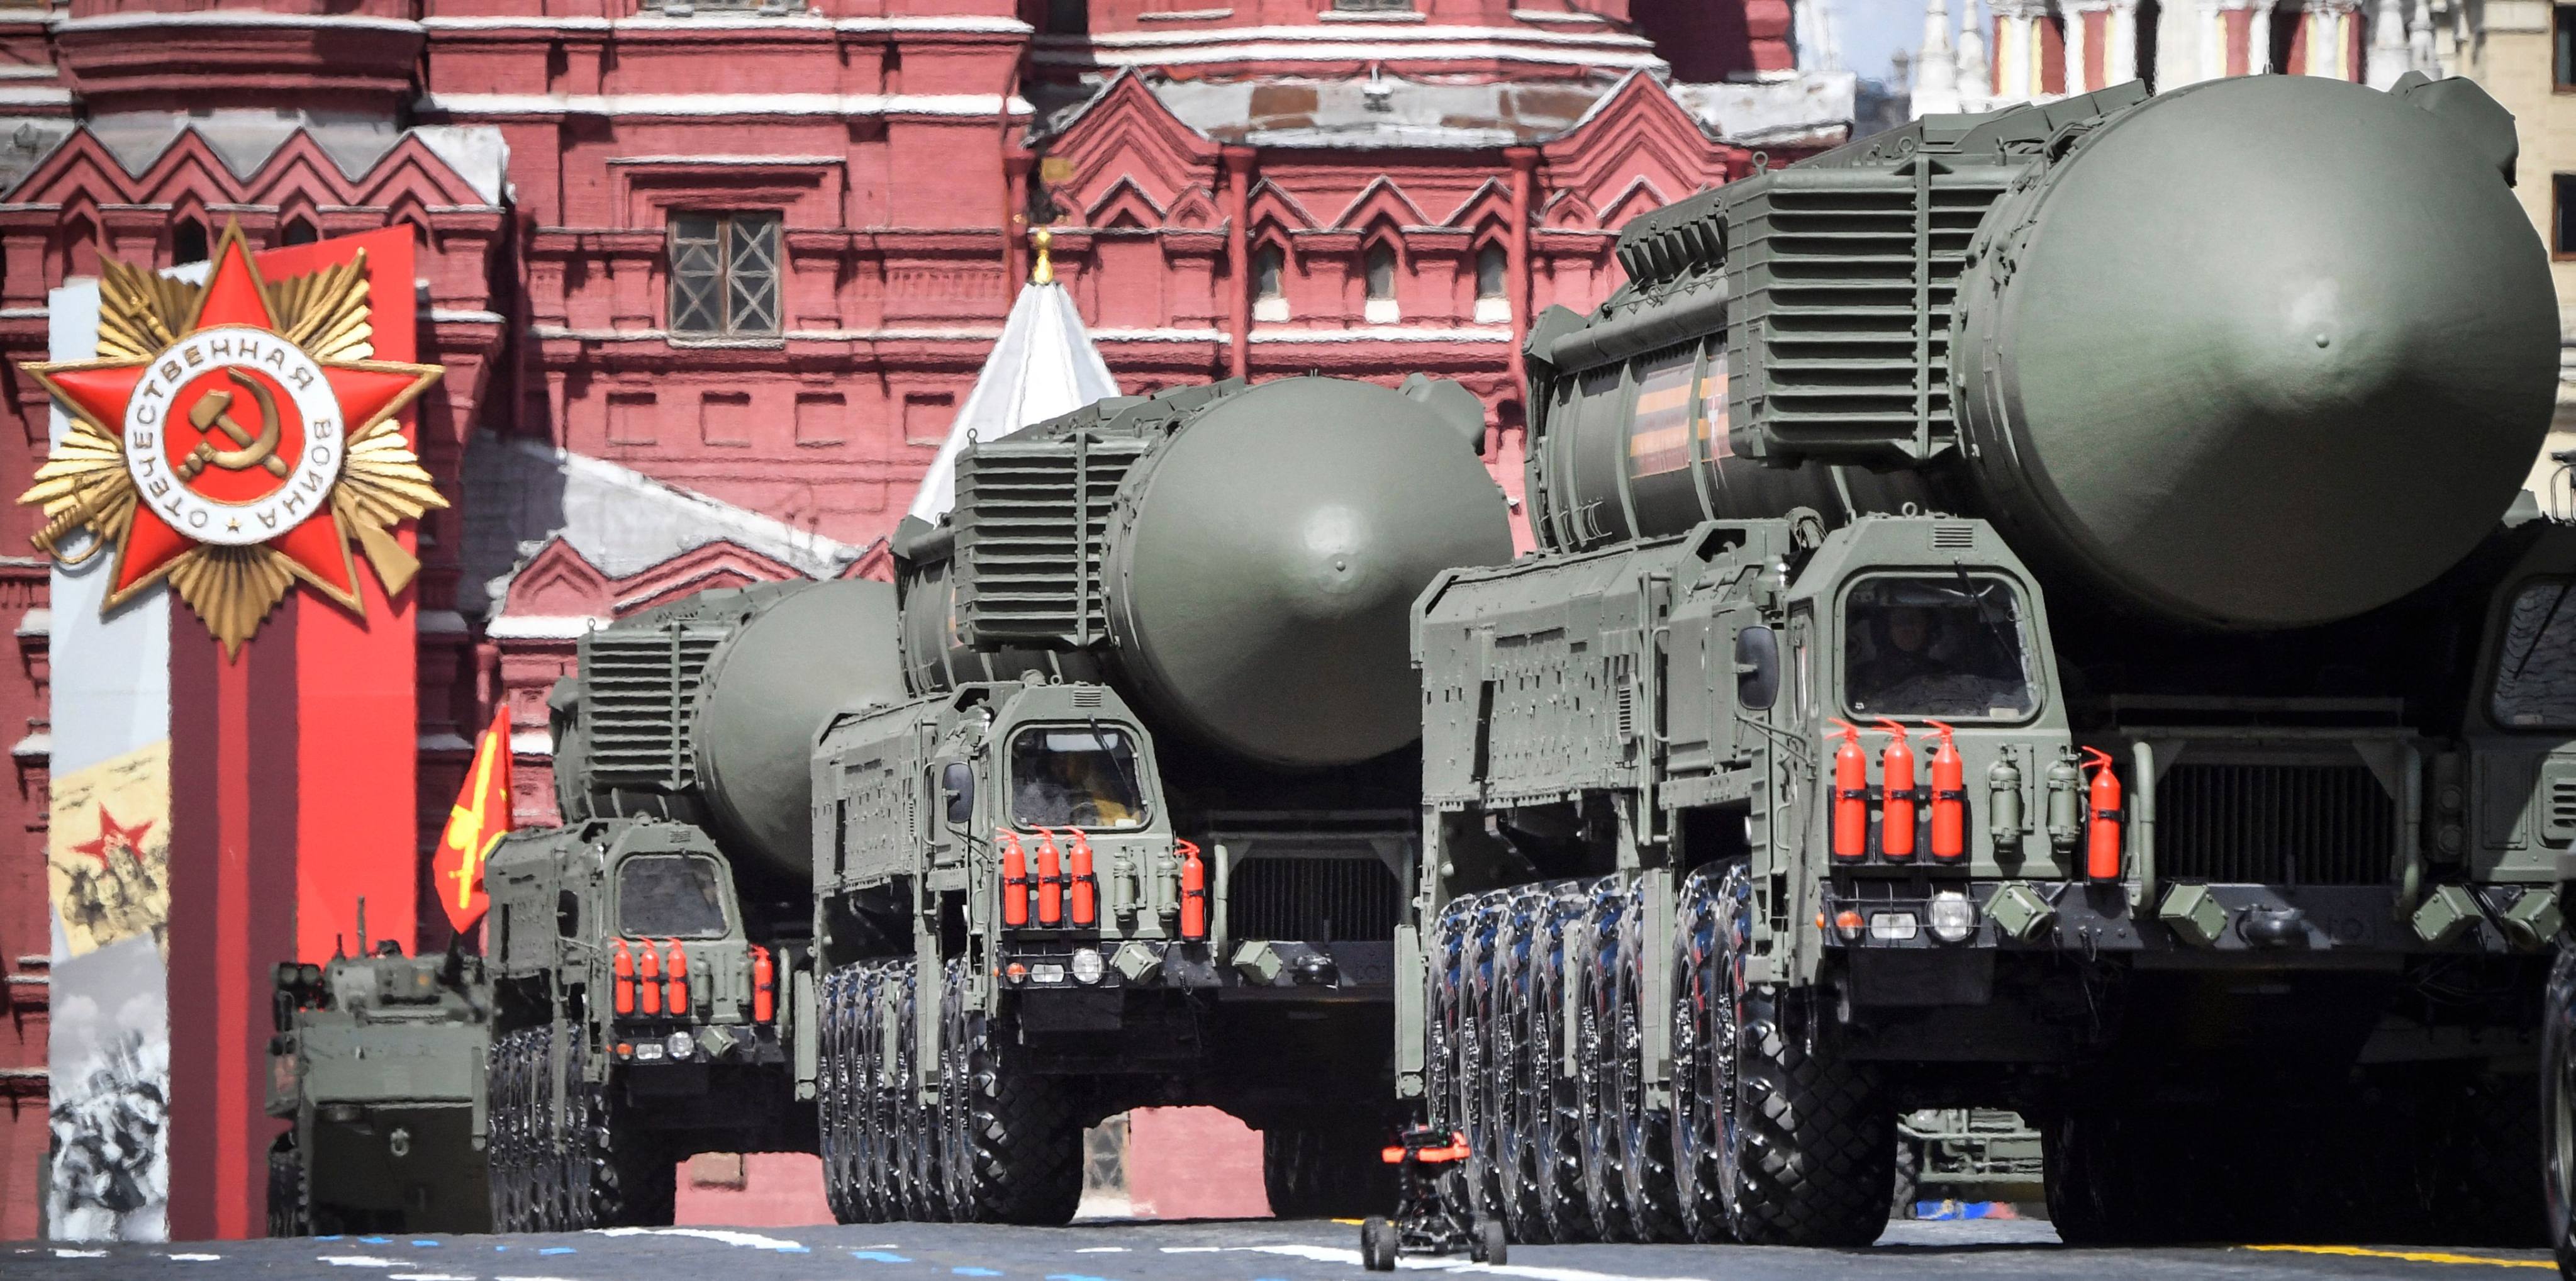 Russian Yars intercontinental ballistic missile launchers parade through Red Square in Moscow in May 2022. Photo: AFP